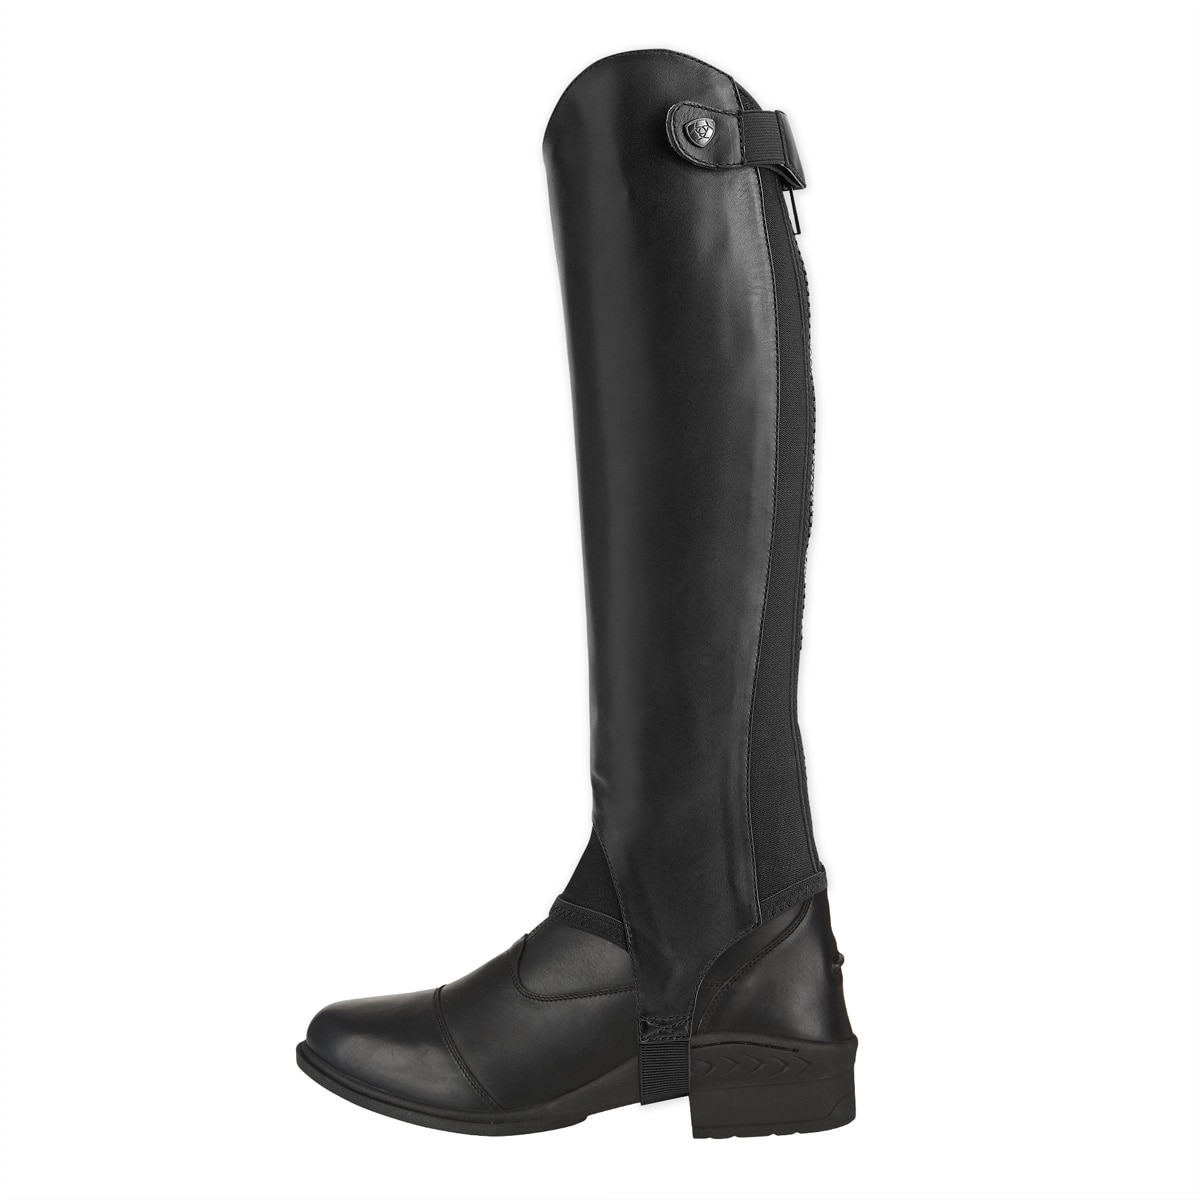 New Ariat Close Contact Leather Half Chaps Waxed Black Small XXS 39.5 x 32 cm 